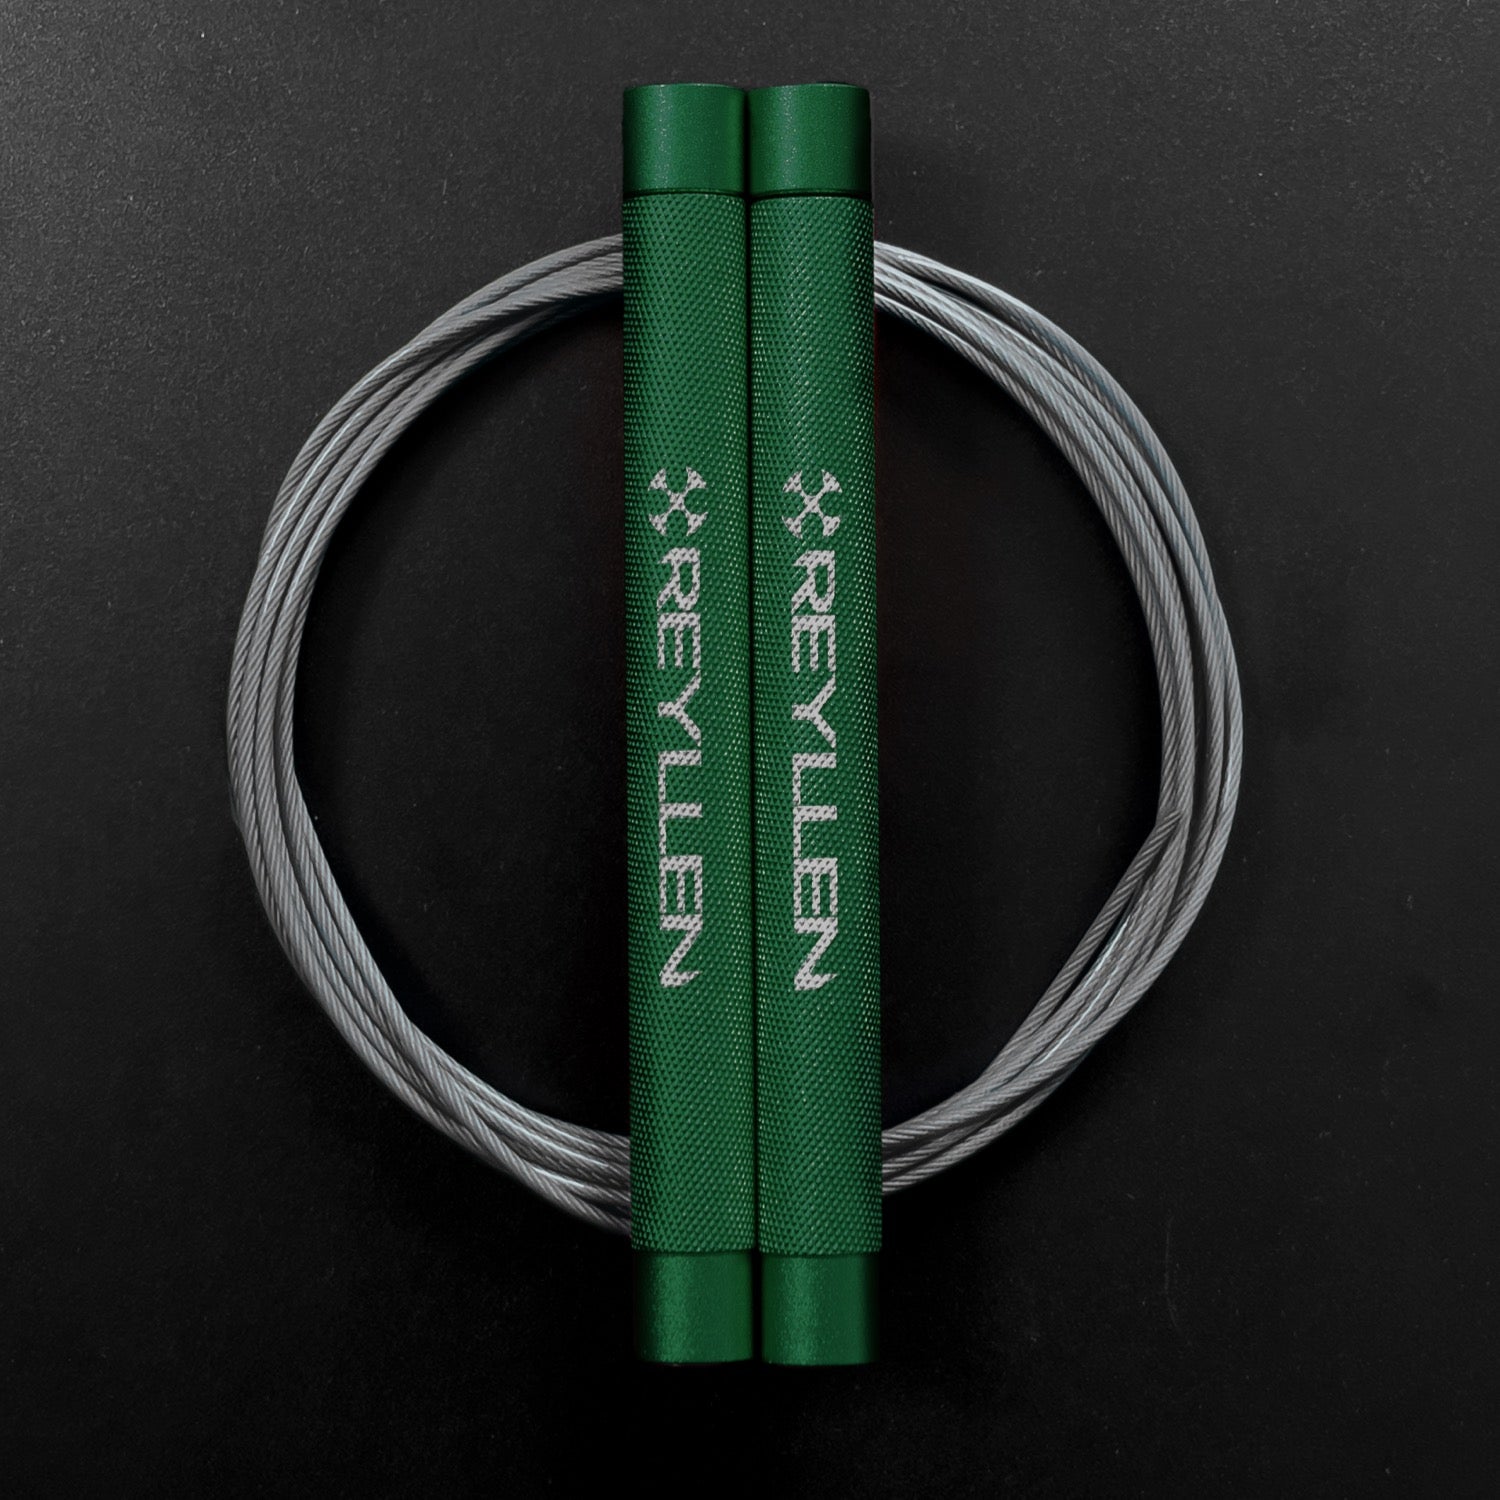 Reyllen Flare Mx Speed Skipping Jump Rope - Aluminium Handles - green with grey nylon coated cable